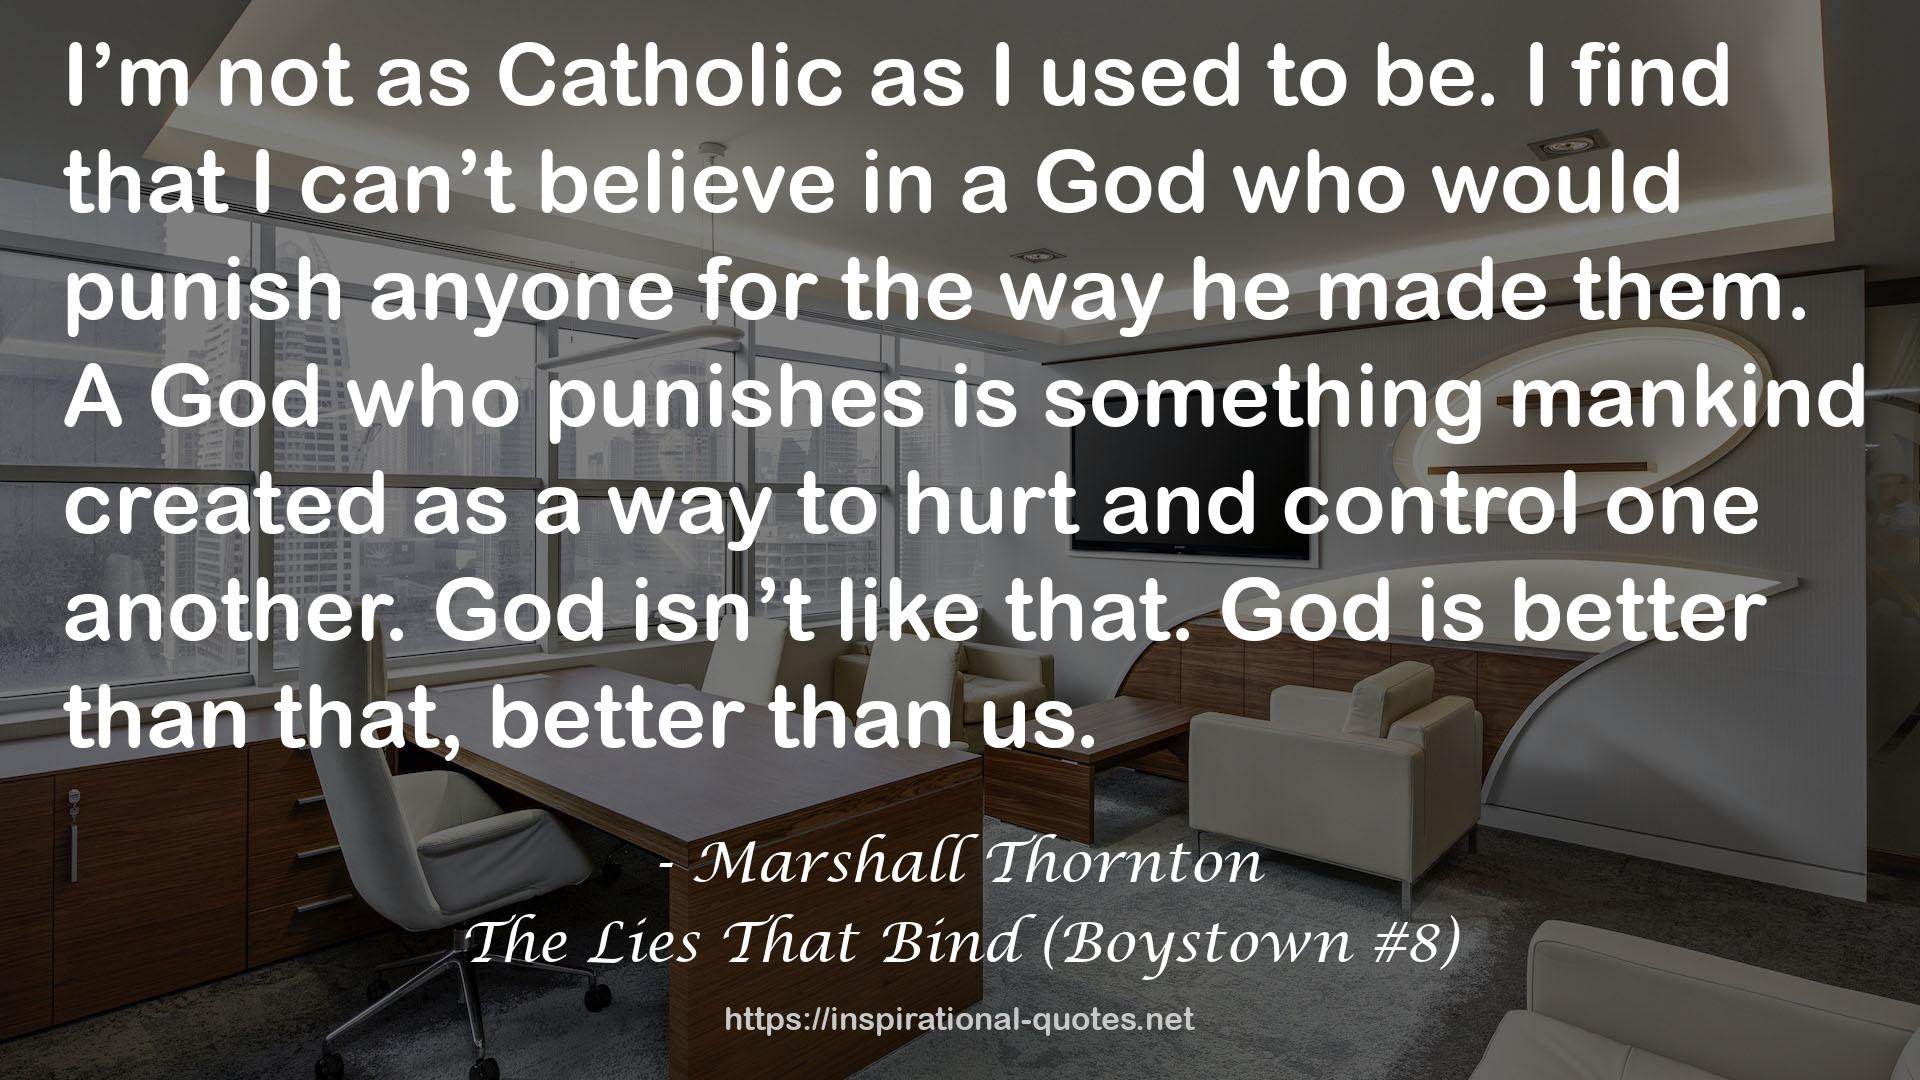 The Lies That Bind (Boystown #8) QUOTES